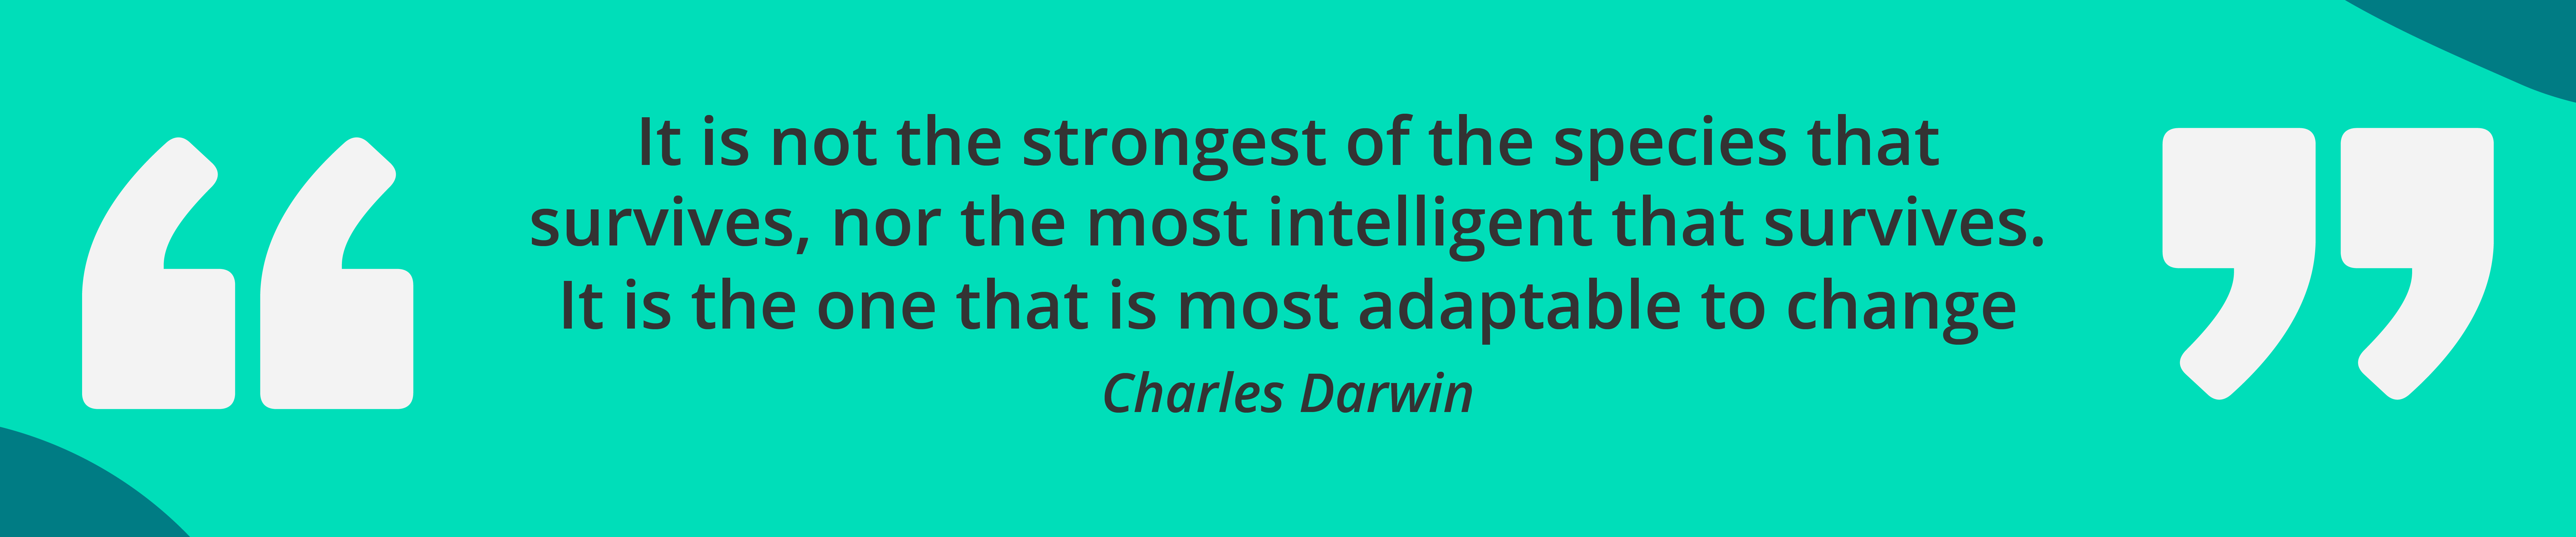 quote by charles darwin-  “It is not the strongest of the species that survives, nor the most intelligent that survives. It is the one that is most adaptable to change”.